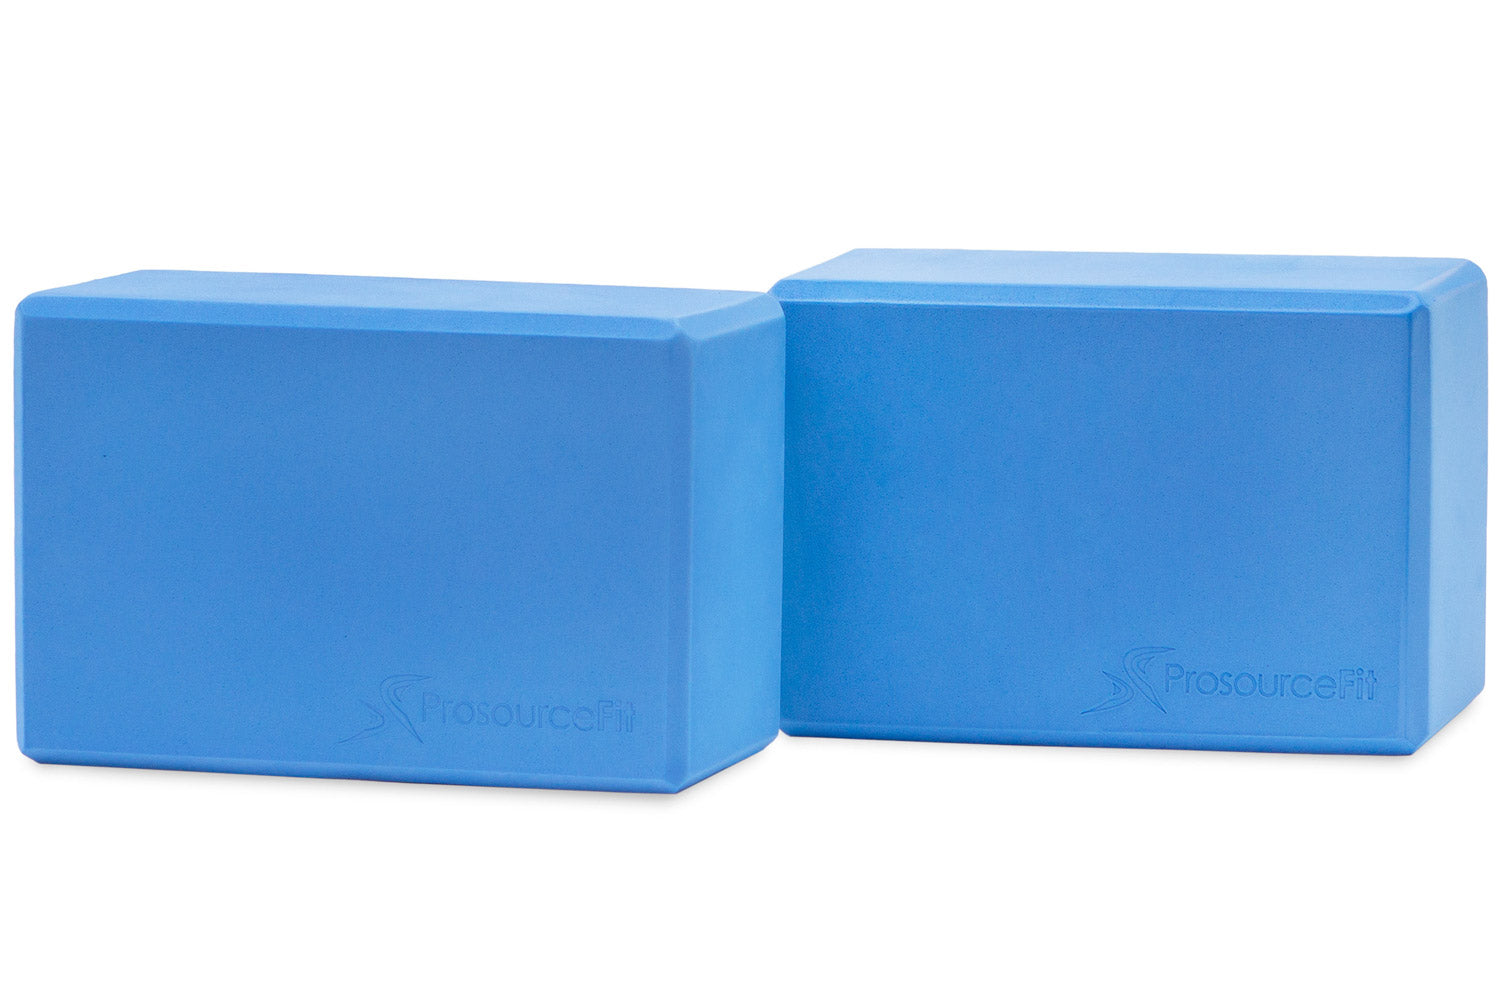 Yoga Block Foam for Exercise Fitness Healthy Life (Blue)